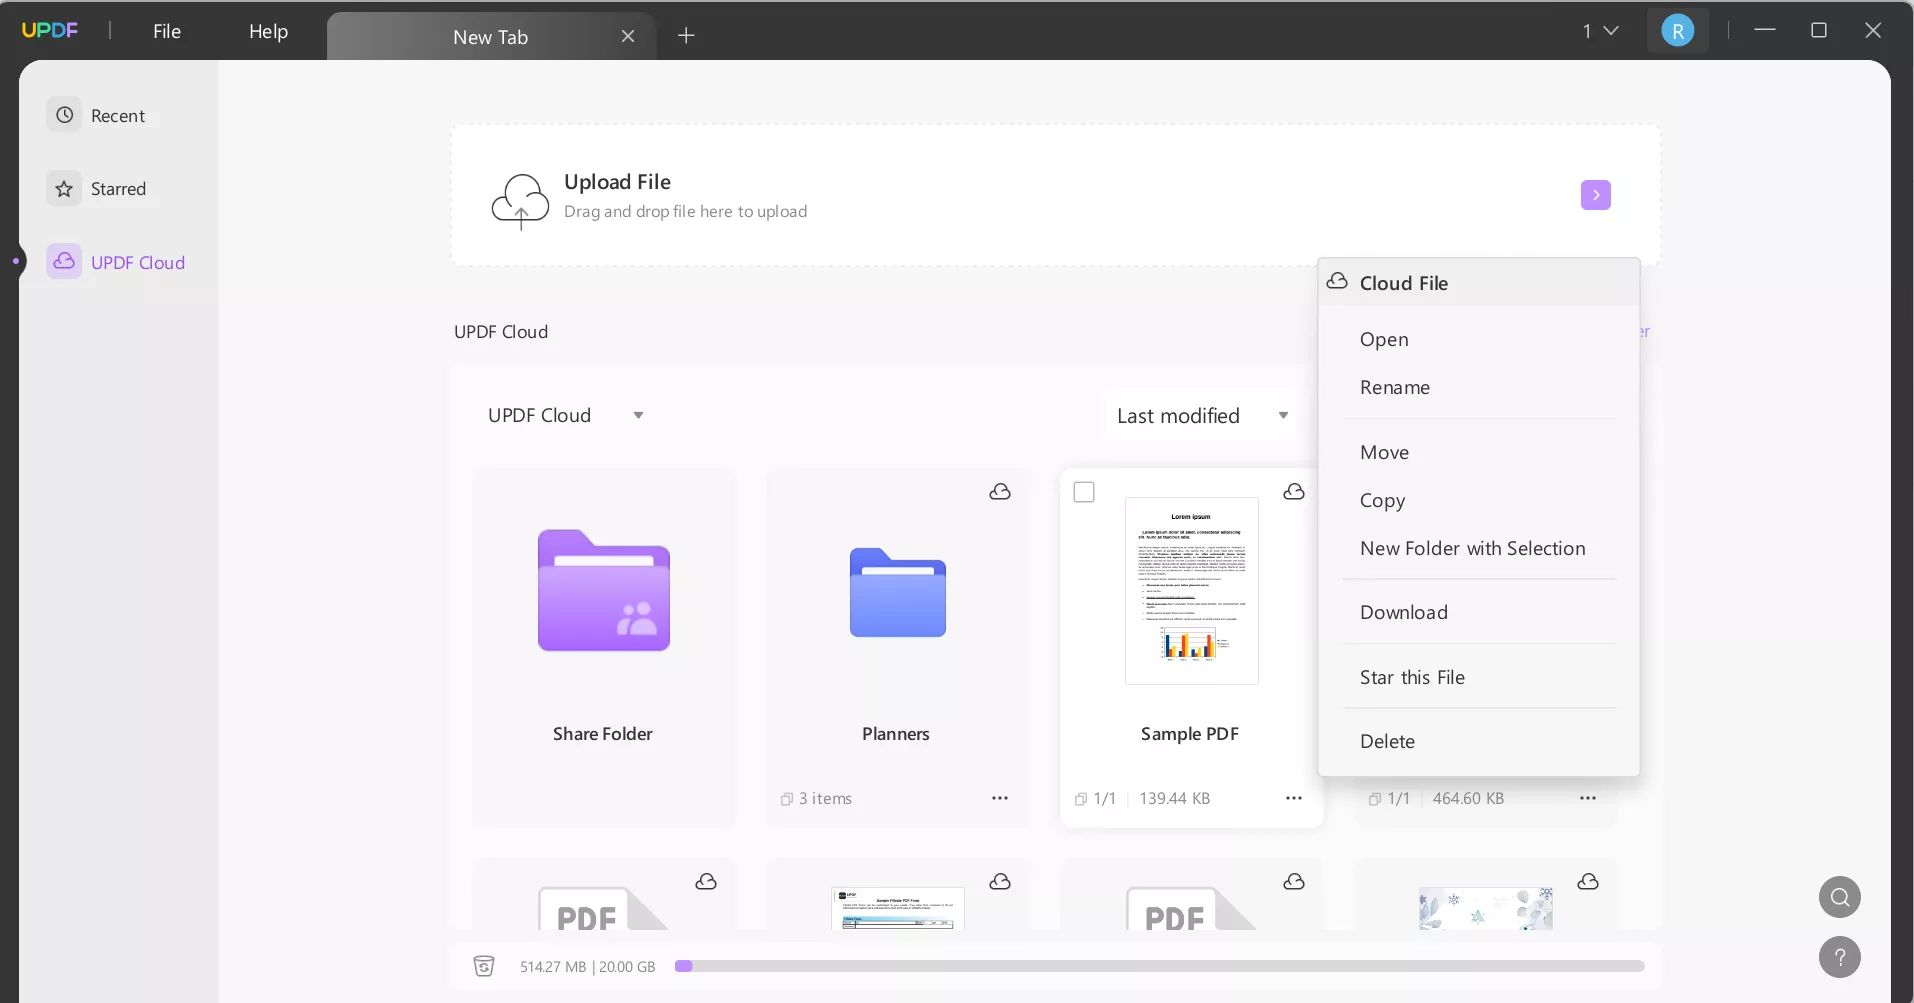 click on the three dots to organize pdf on updf cloud